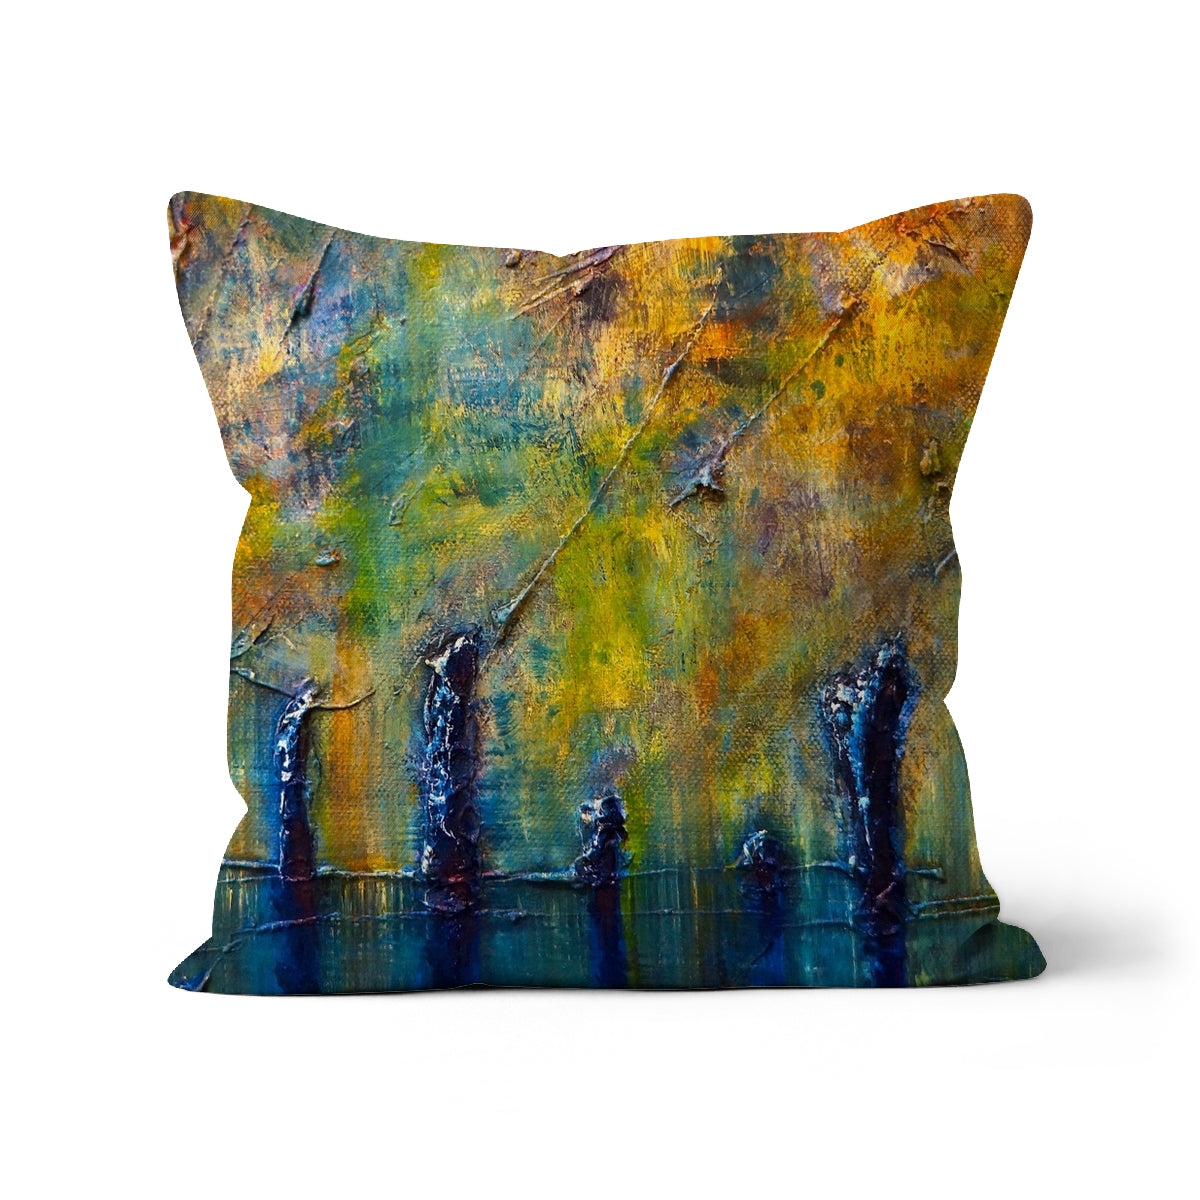 Stenness Moonlight Orkney Art Gifts Cushion-Cushions-Orkney Art Gallery-Canvas-22"x22"-Paintings, Prints, Homeware, Art Gifts From Scotland By Scottish Artist Kevin Hunter